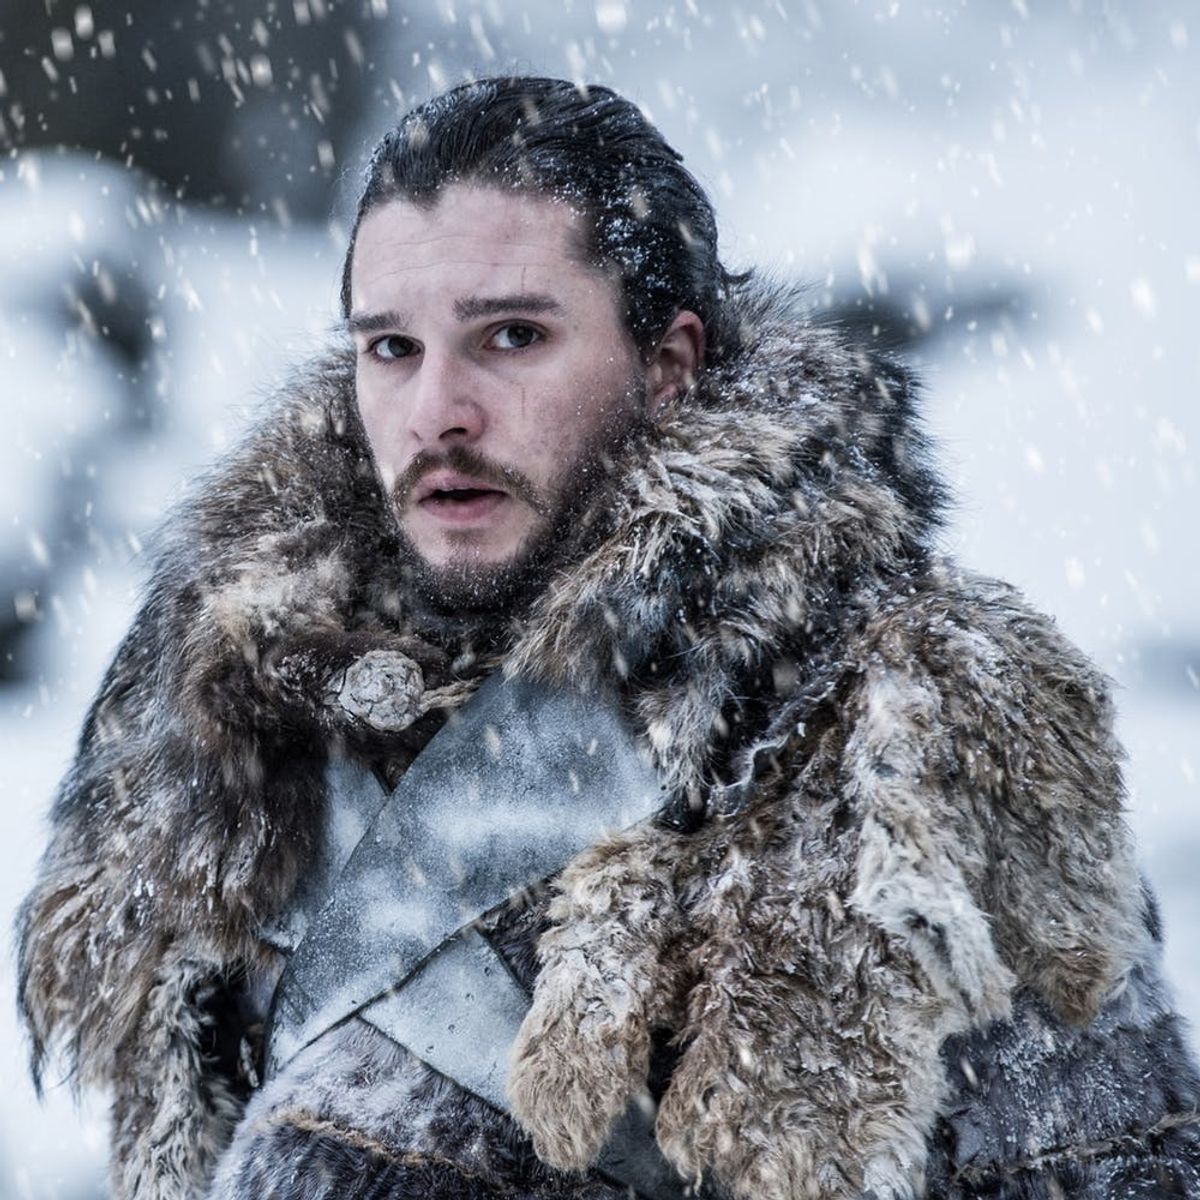 People Already Can’t Deal With the “Game of Thrones” Finale and It’s Relatable AF